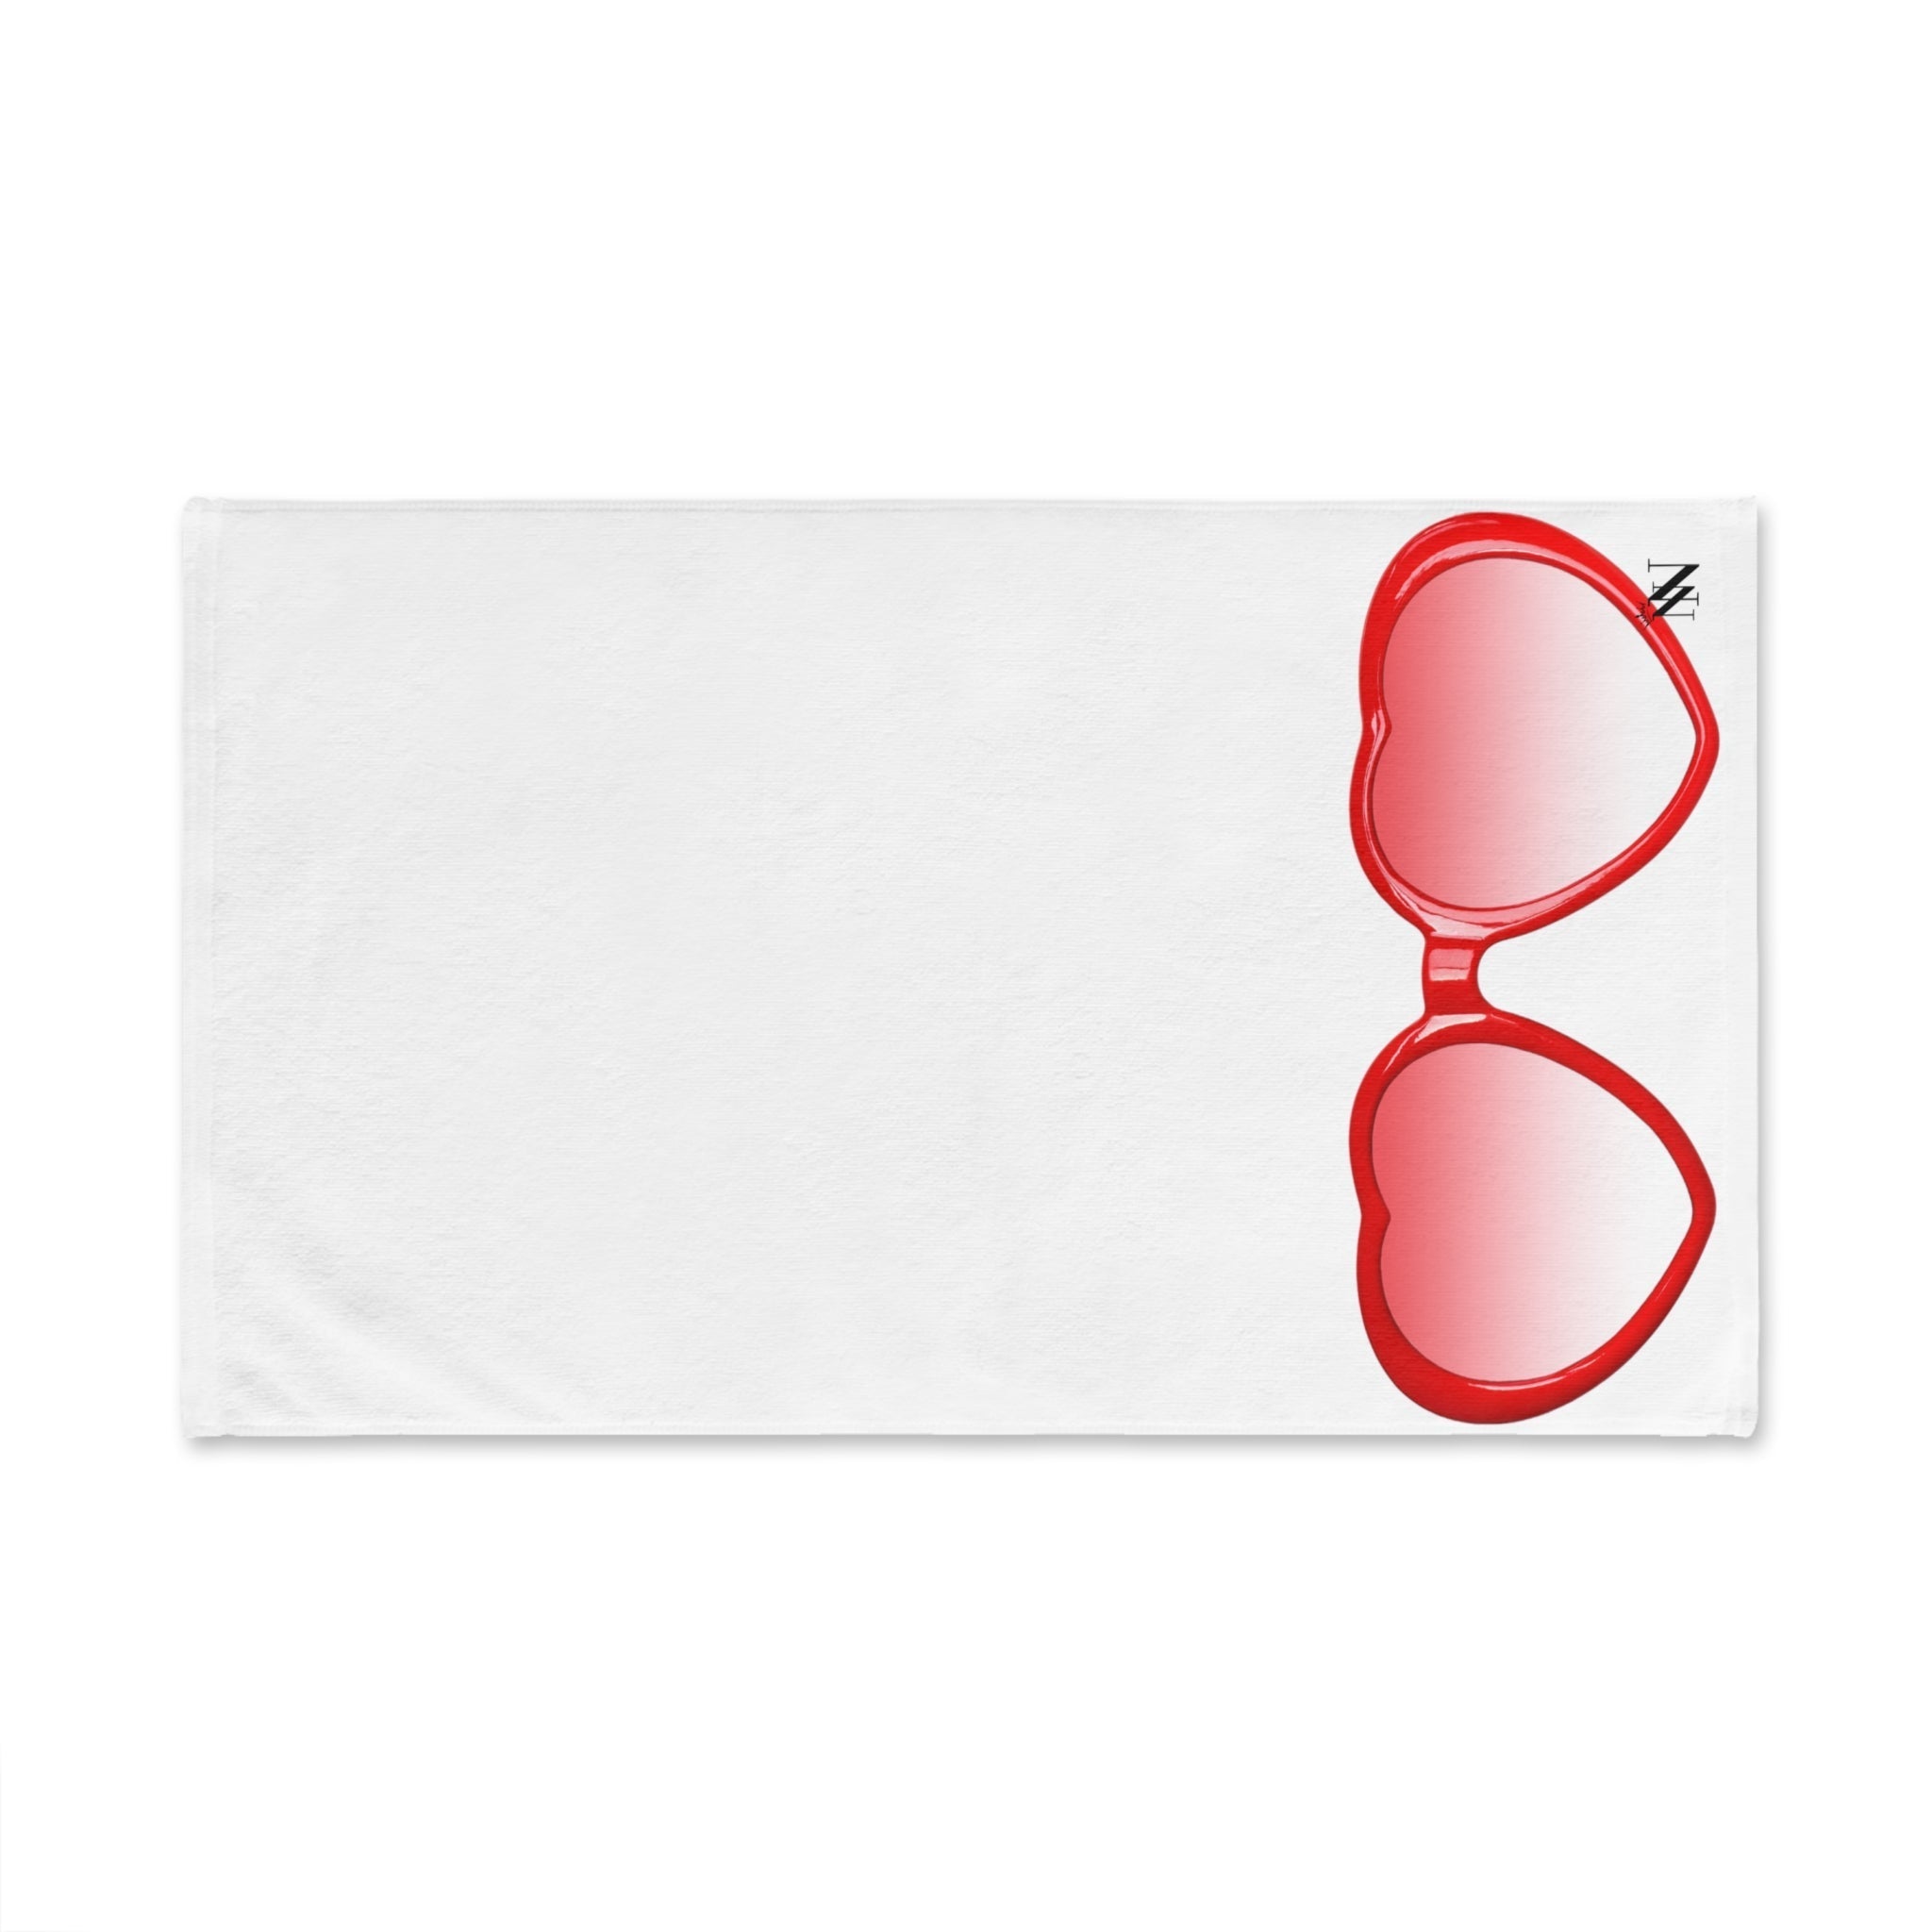 Heart Sunglasses White | Funny Gifts for Men - Gifts for Him - Birthday Gifts for Men, Him, Her, Husband, Boyfriend, Girlfriend, New Couple Gifts, Fathers & Valentines Day Gifts, Christmas Gifts NECTAR NAPKINS